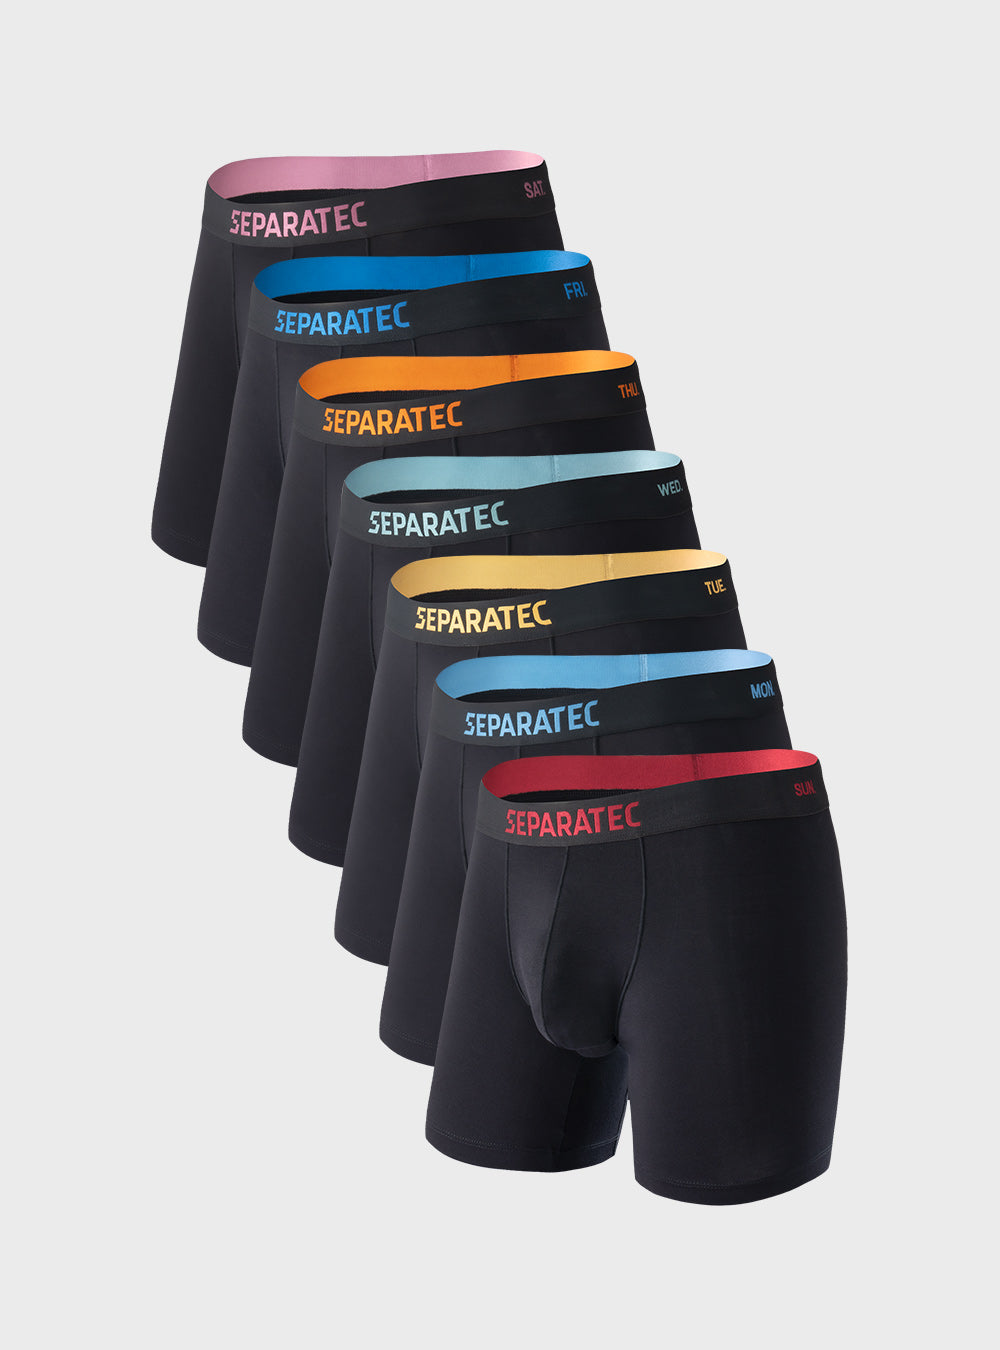 Dual Pouch Silk Touch Colorful Bamboo Rayon Boxer Briefs 7 Pack